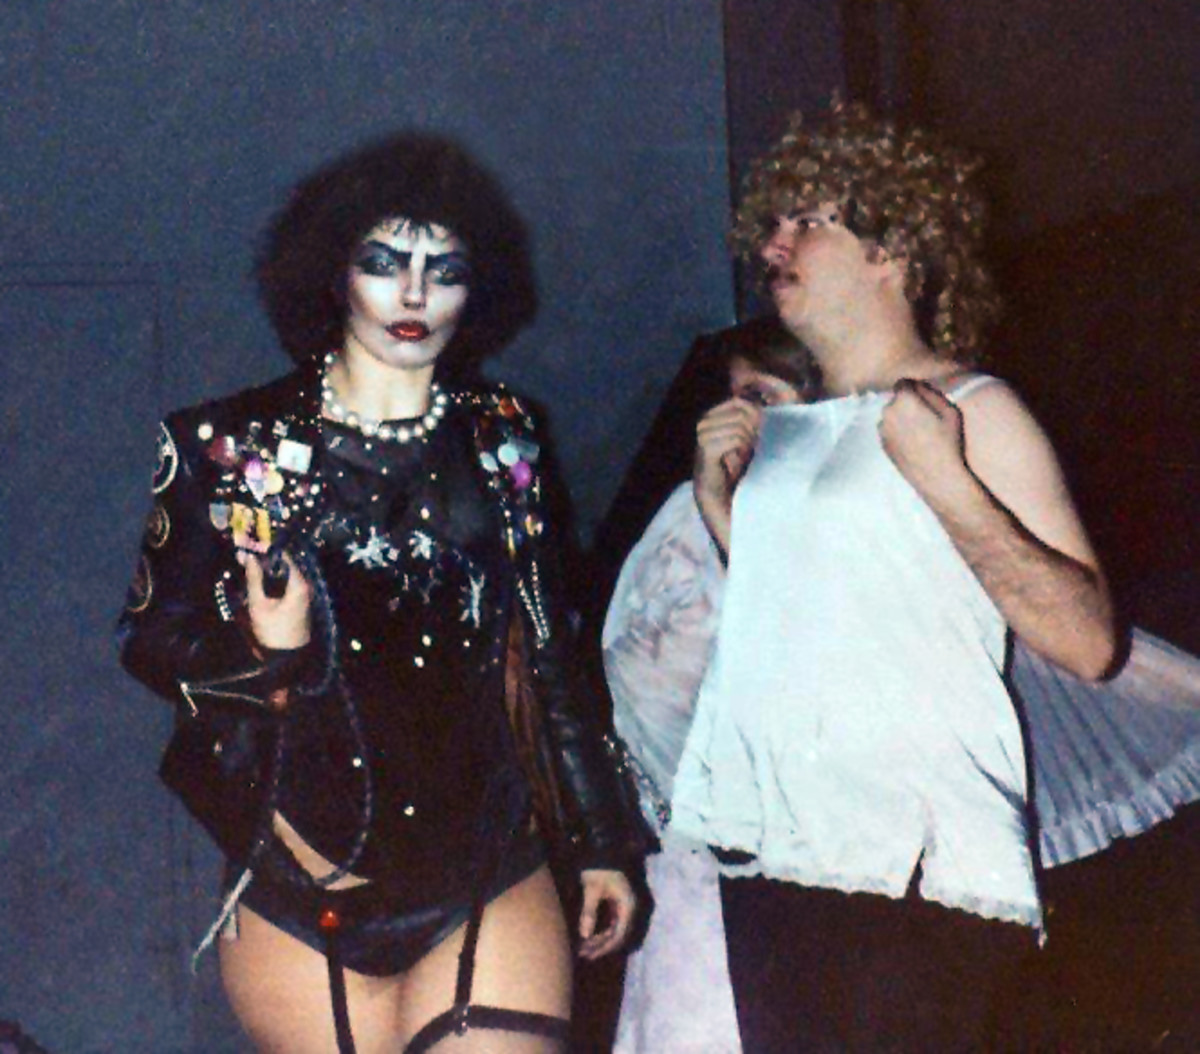 The original Rocky Horror riffers, Dori Hartley and Sal Piro at the Waverly Theatre in New York in 1977. 